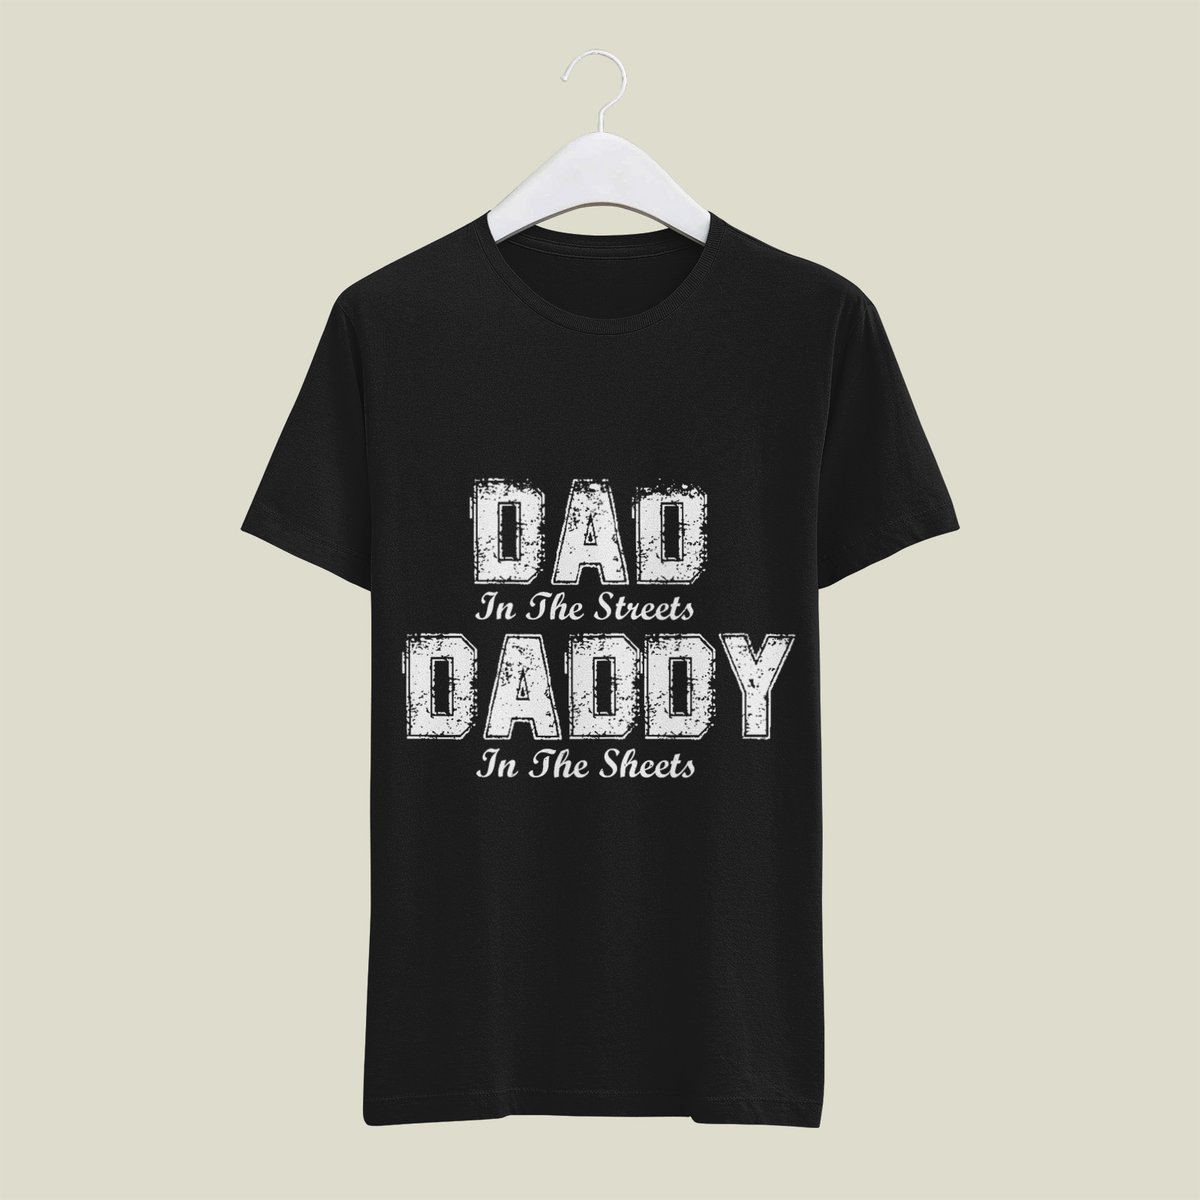 New artwork for sale! - 'Dad In The Streets Daddy In The Sheets Funny Fathers Day' if you need this shirt: rb.gy/75w4p redbubble teepublic zazzle  teespring etsy spring artist #redbubble #teepublic #zazzle #teespring #spring Daddy #FatherDaughterLove #fatherdaughter